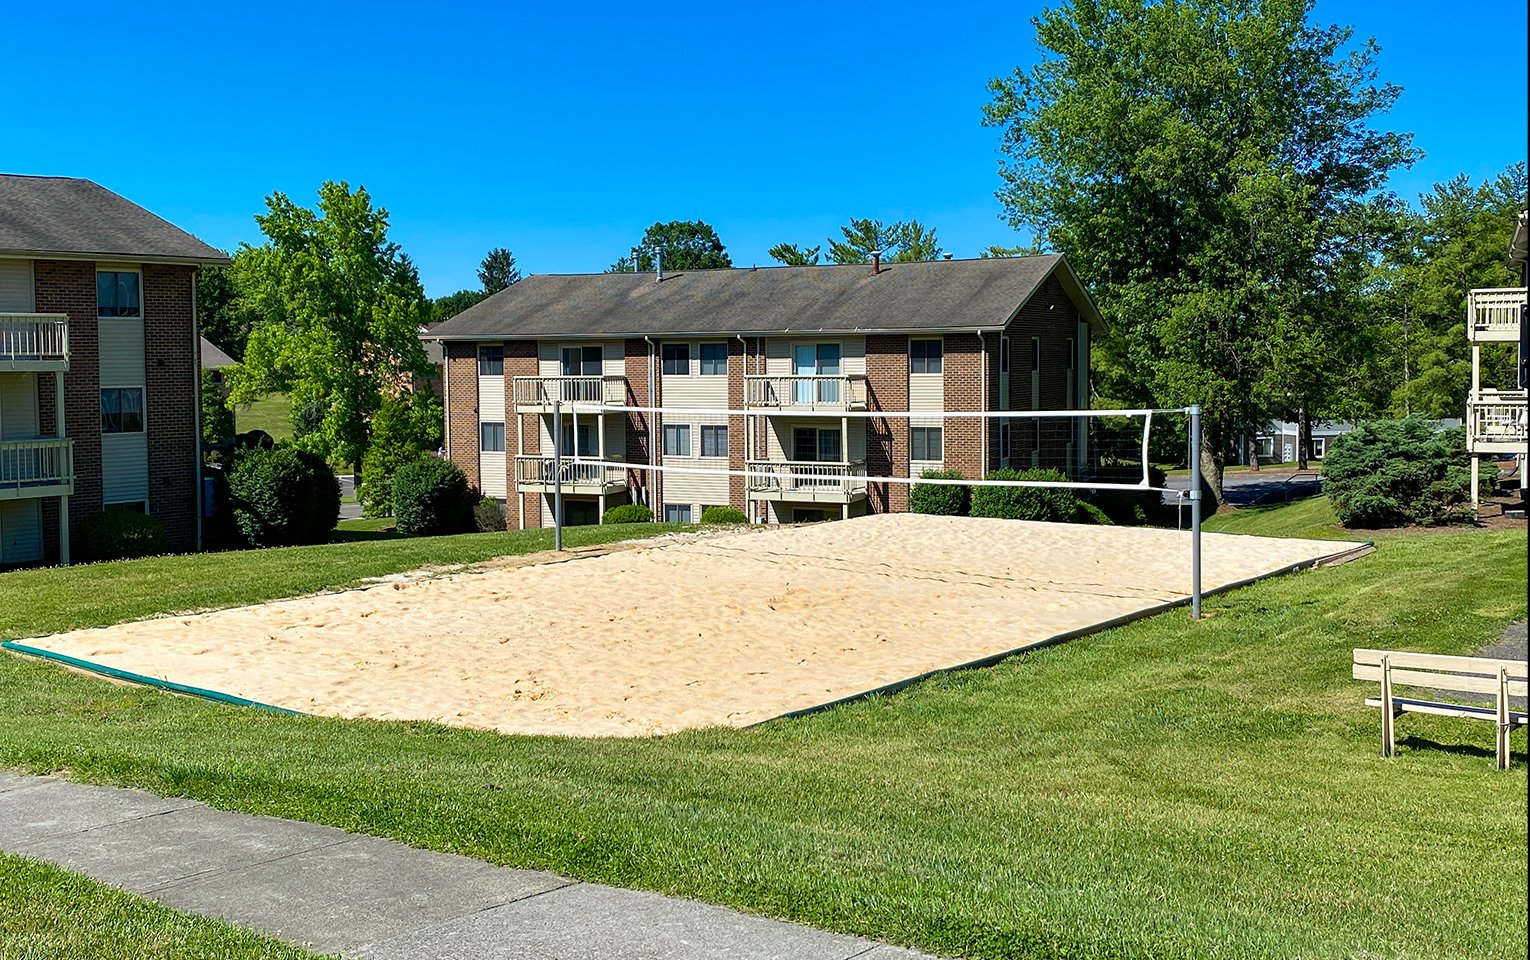 CW Volleyball court